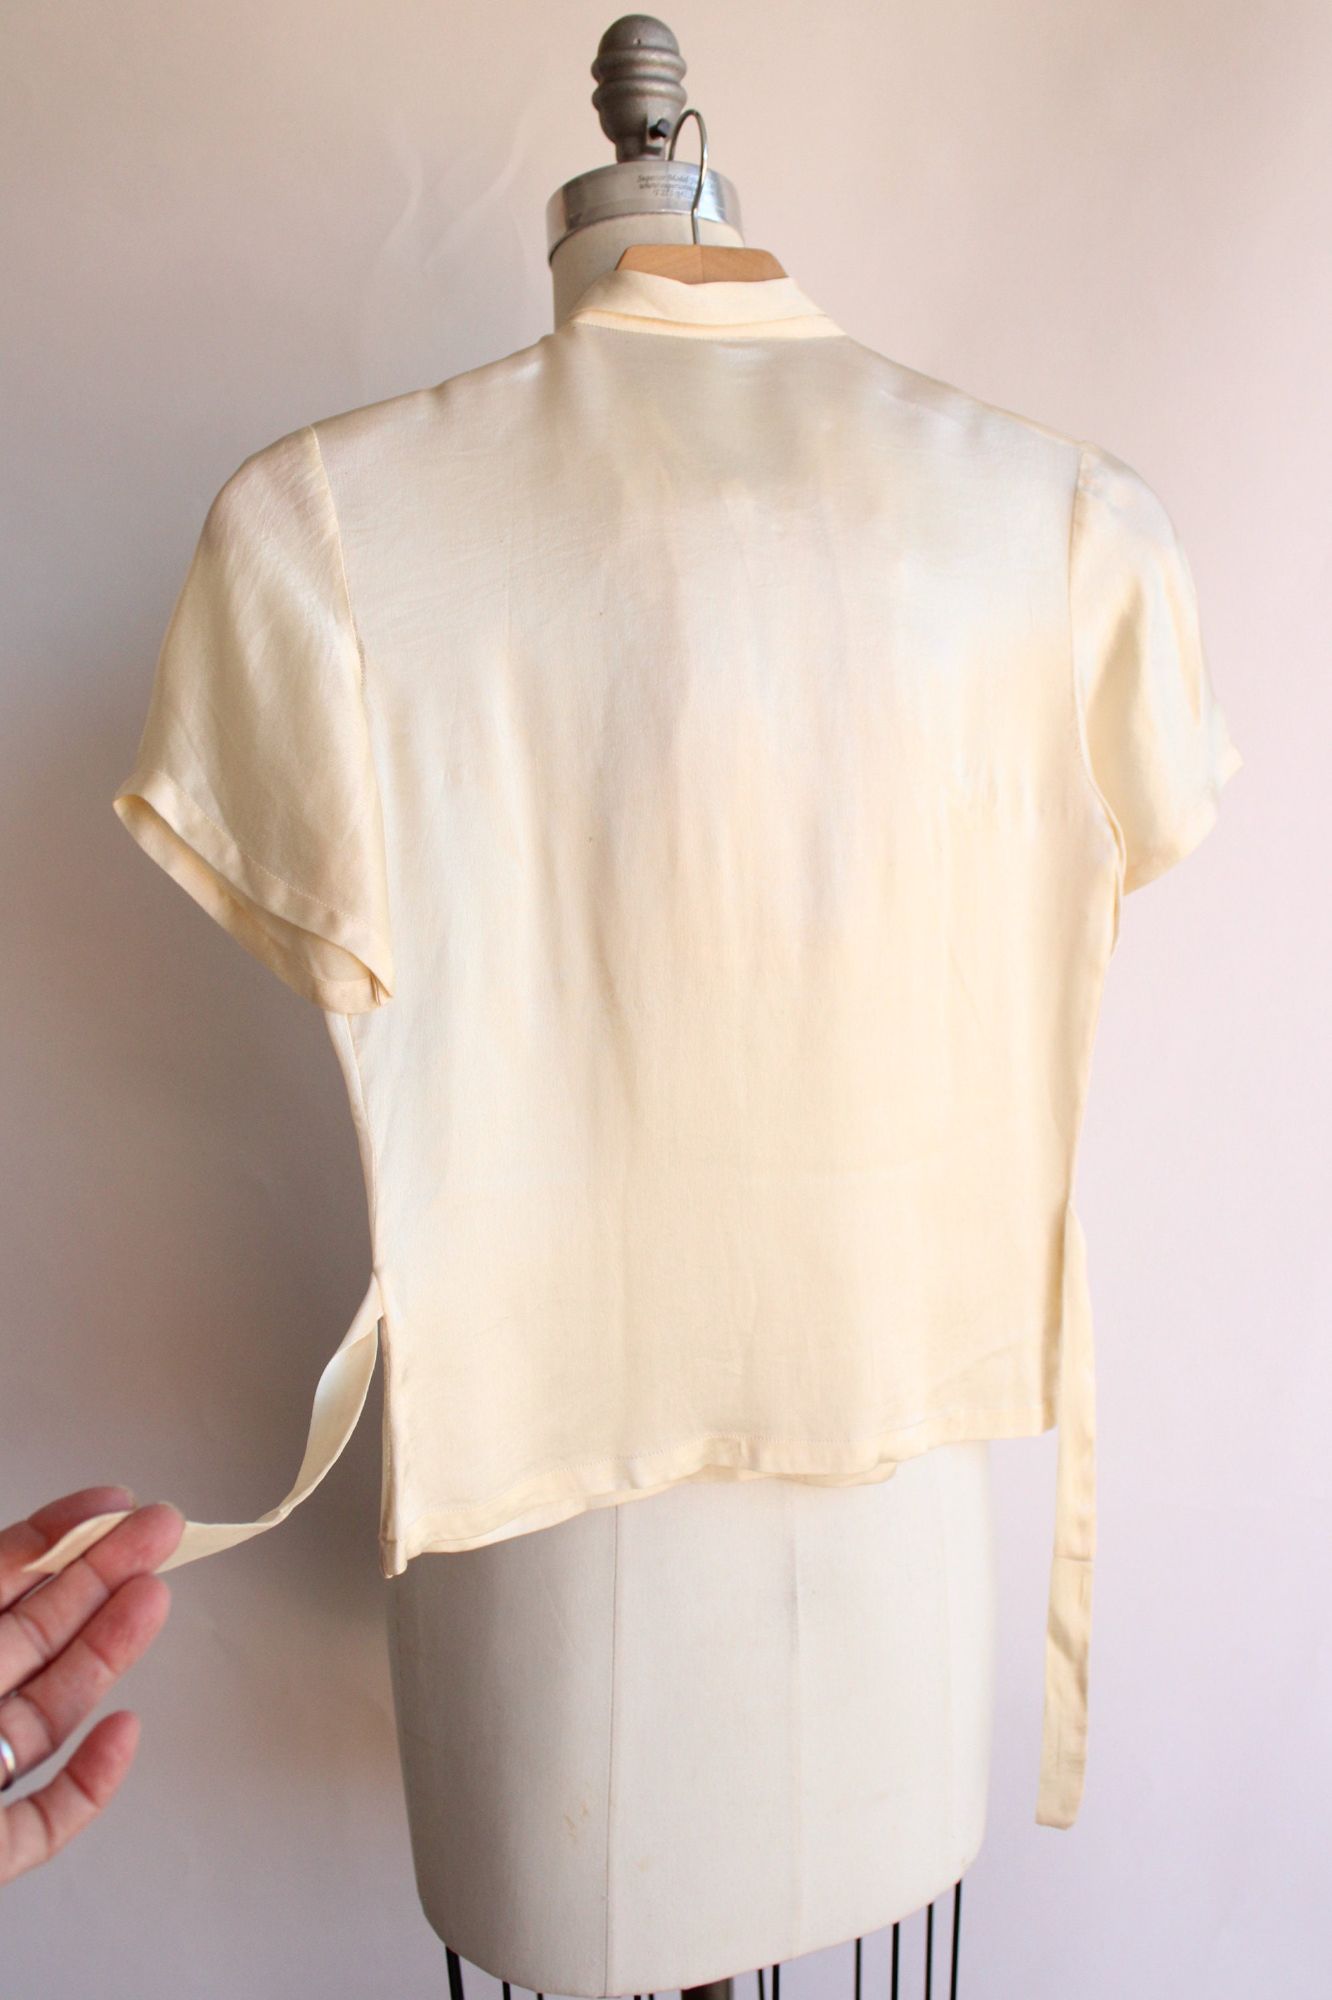 Vintage 1930s 1940s Ivory Silk and Ruffled Blouse